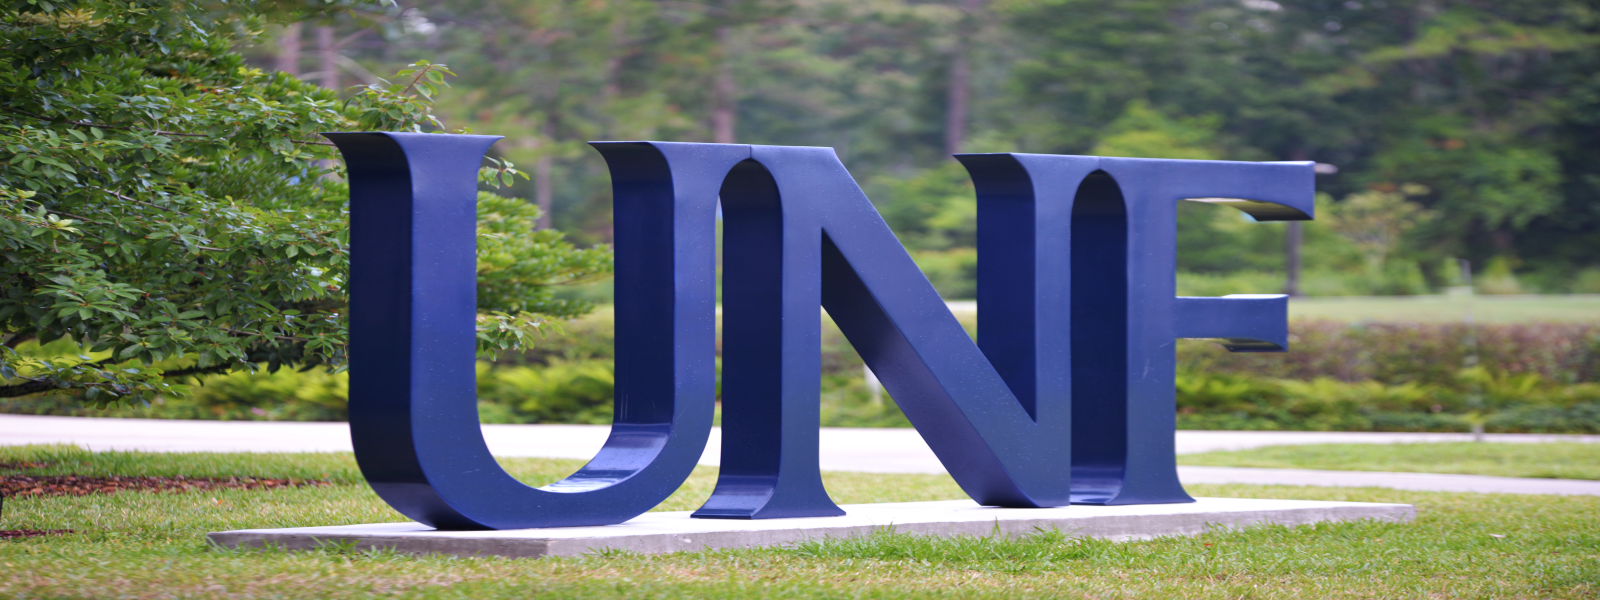 A photo of a sign with a blue letter U, N and F with trees, bushes and a sidewalk in the background.